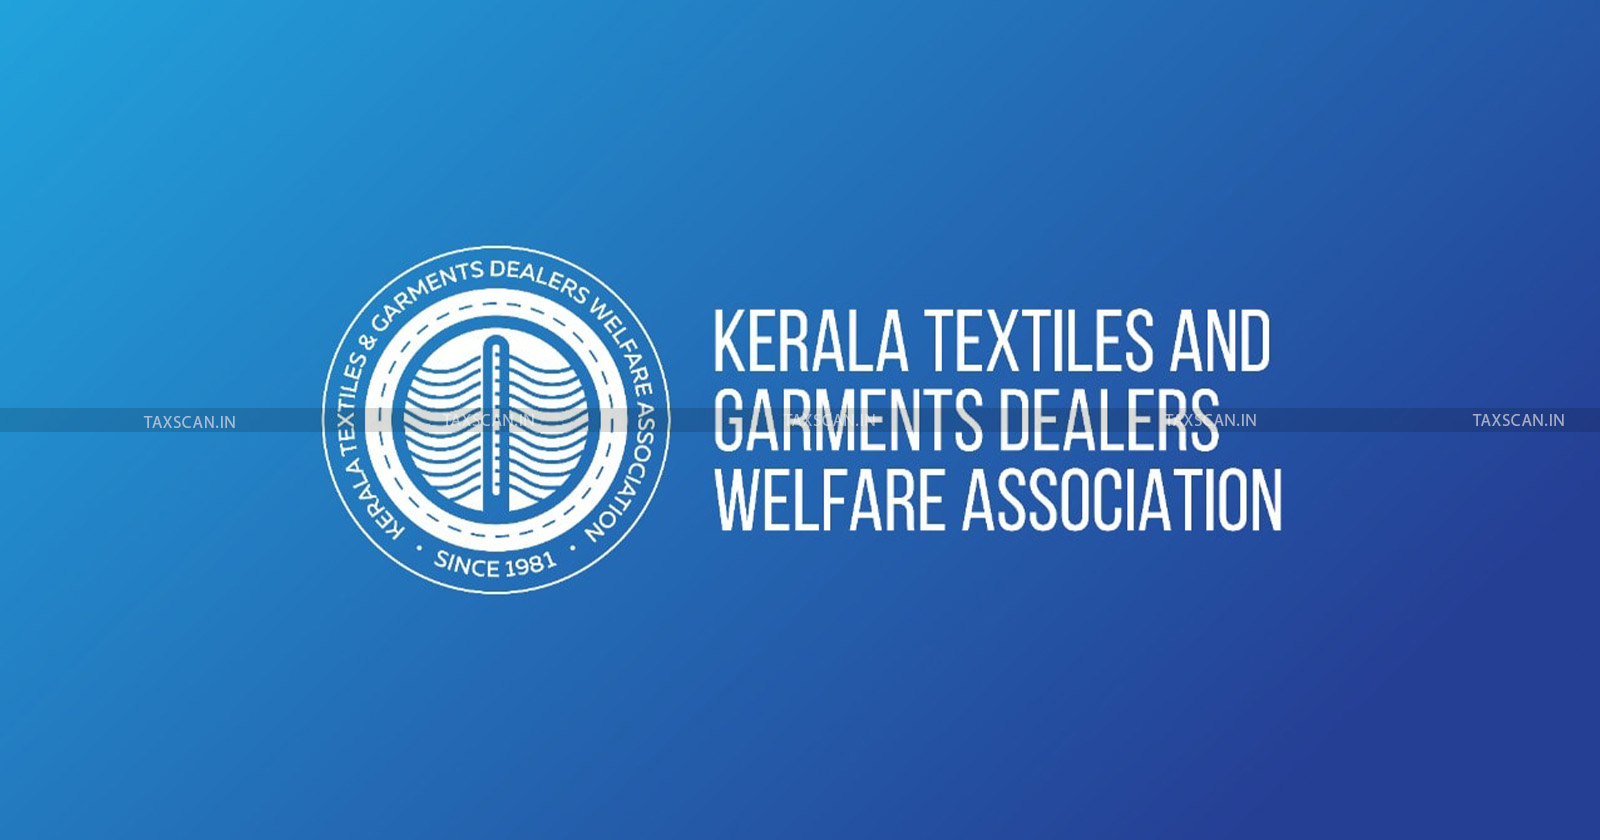 Income Tax - Kerala Textile and Garments Association - KTGDA - Tax implications for MSME - MSME category change - taxscan